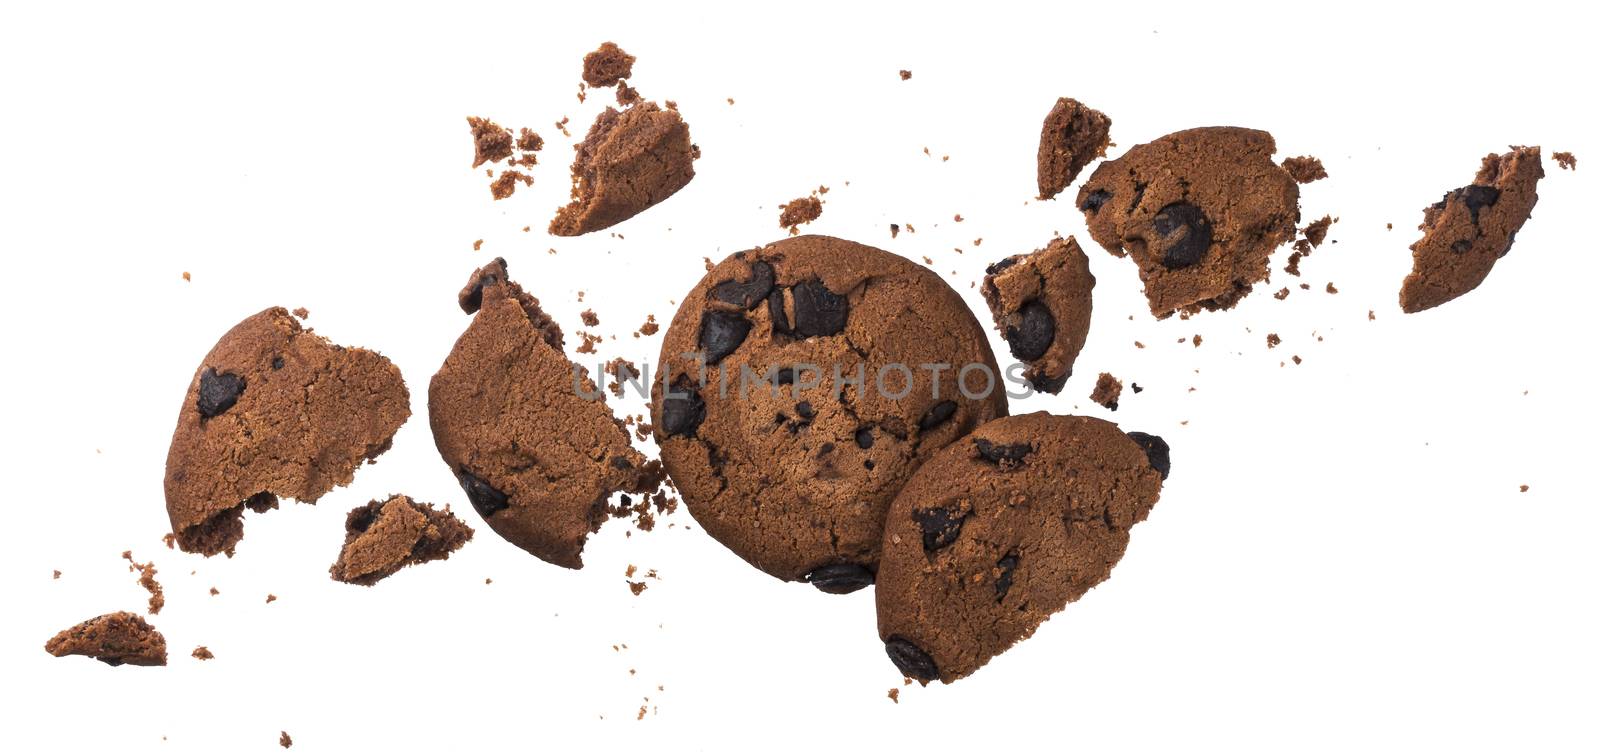 Broken chocolate chip cookies isolated on white background by xamtiw